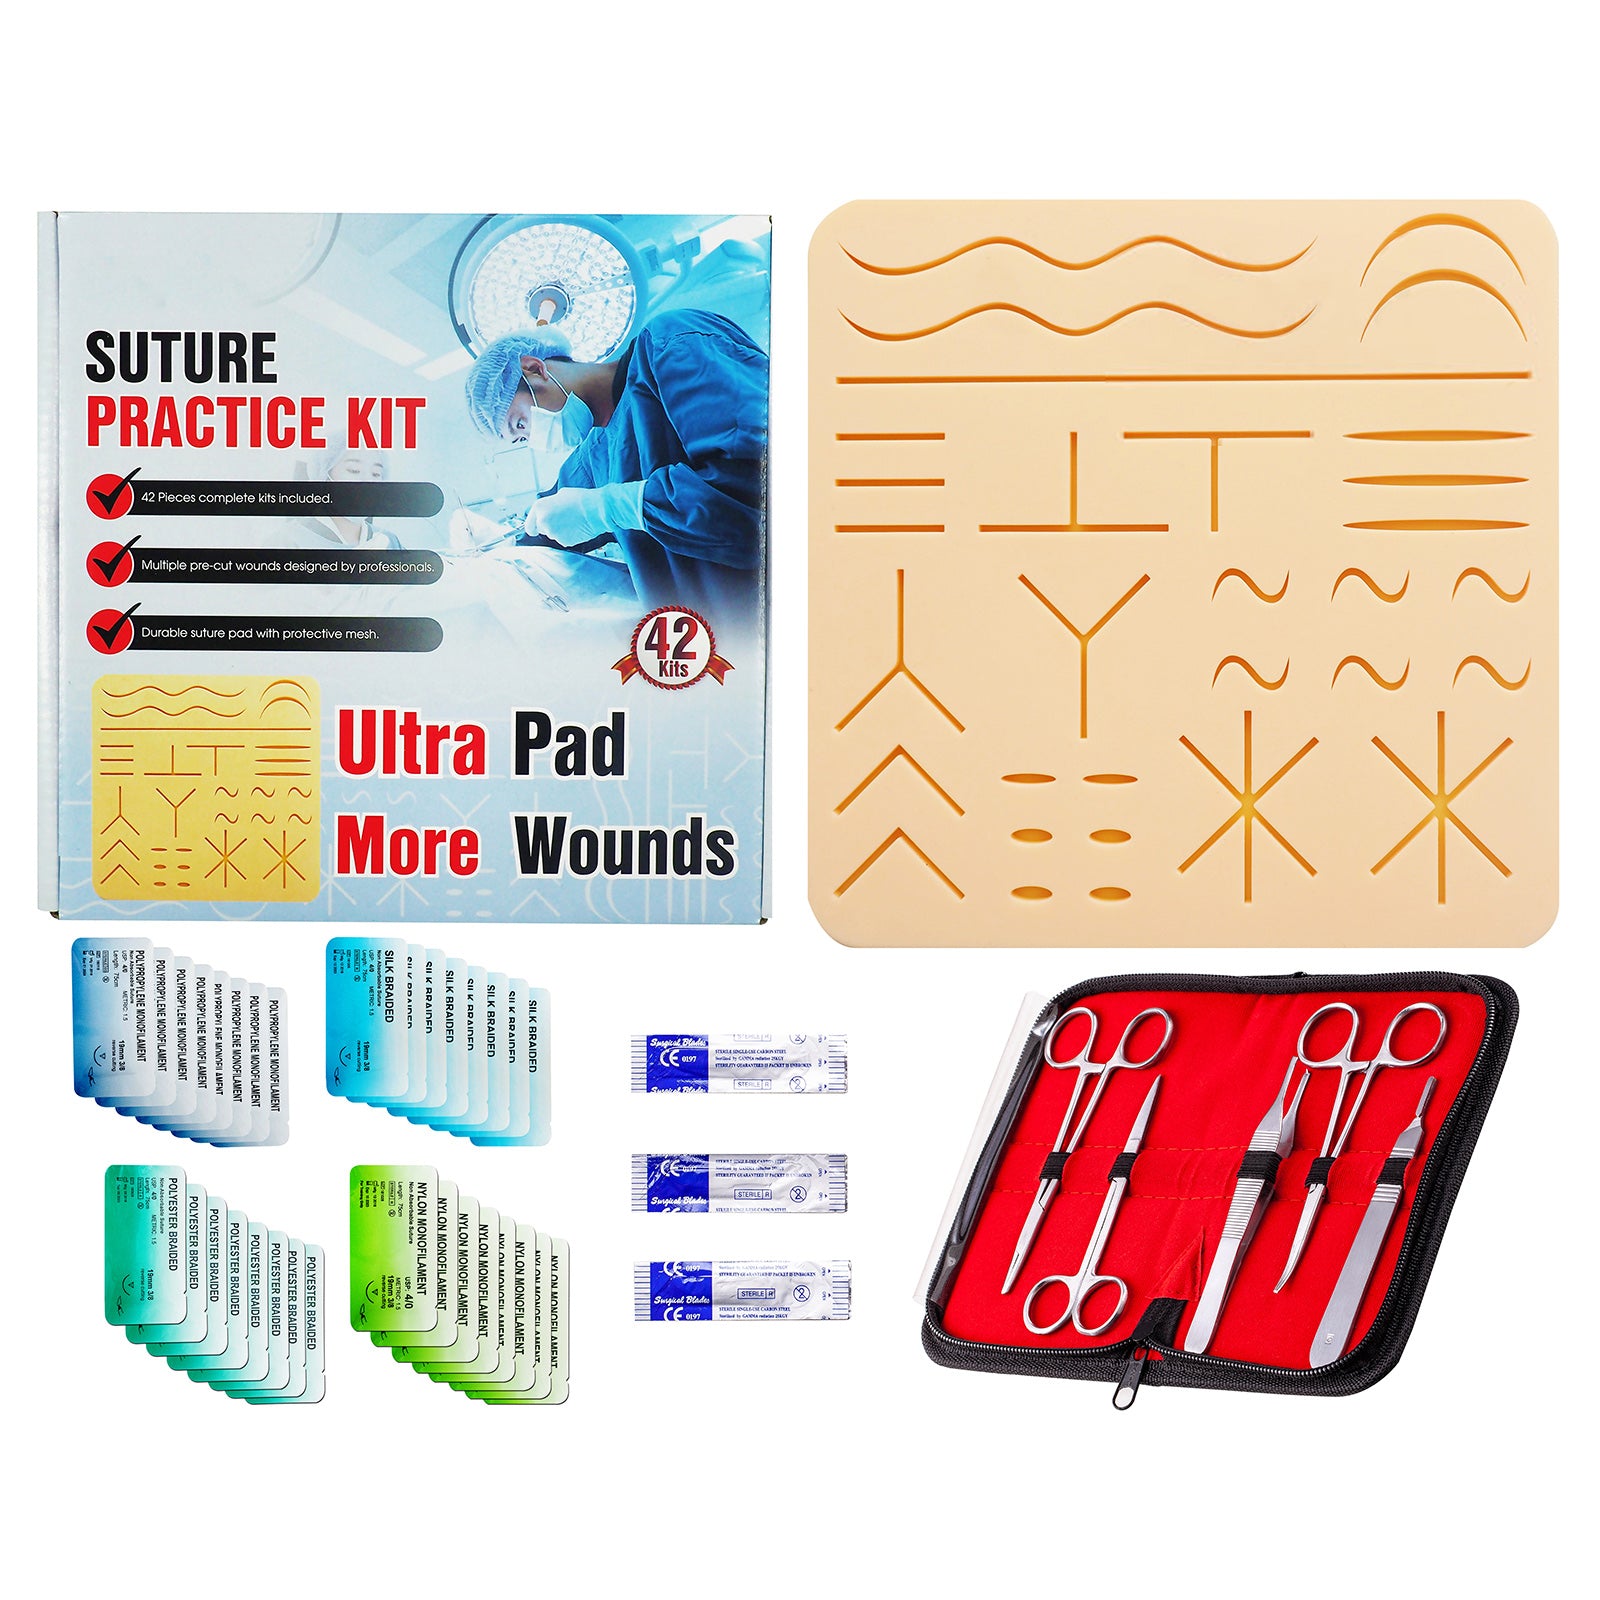 Suture Practice Kit (42 Pieces) for Suture Skill Training – Medarchitect